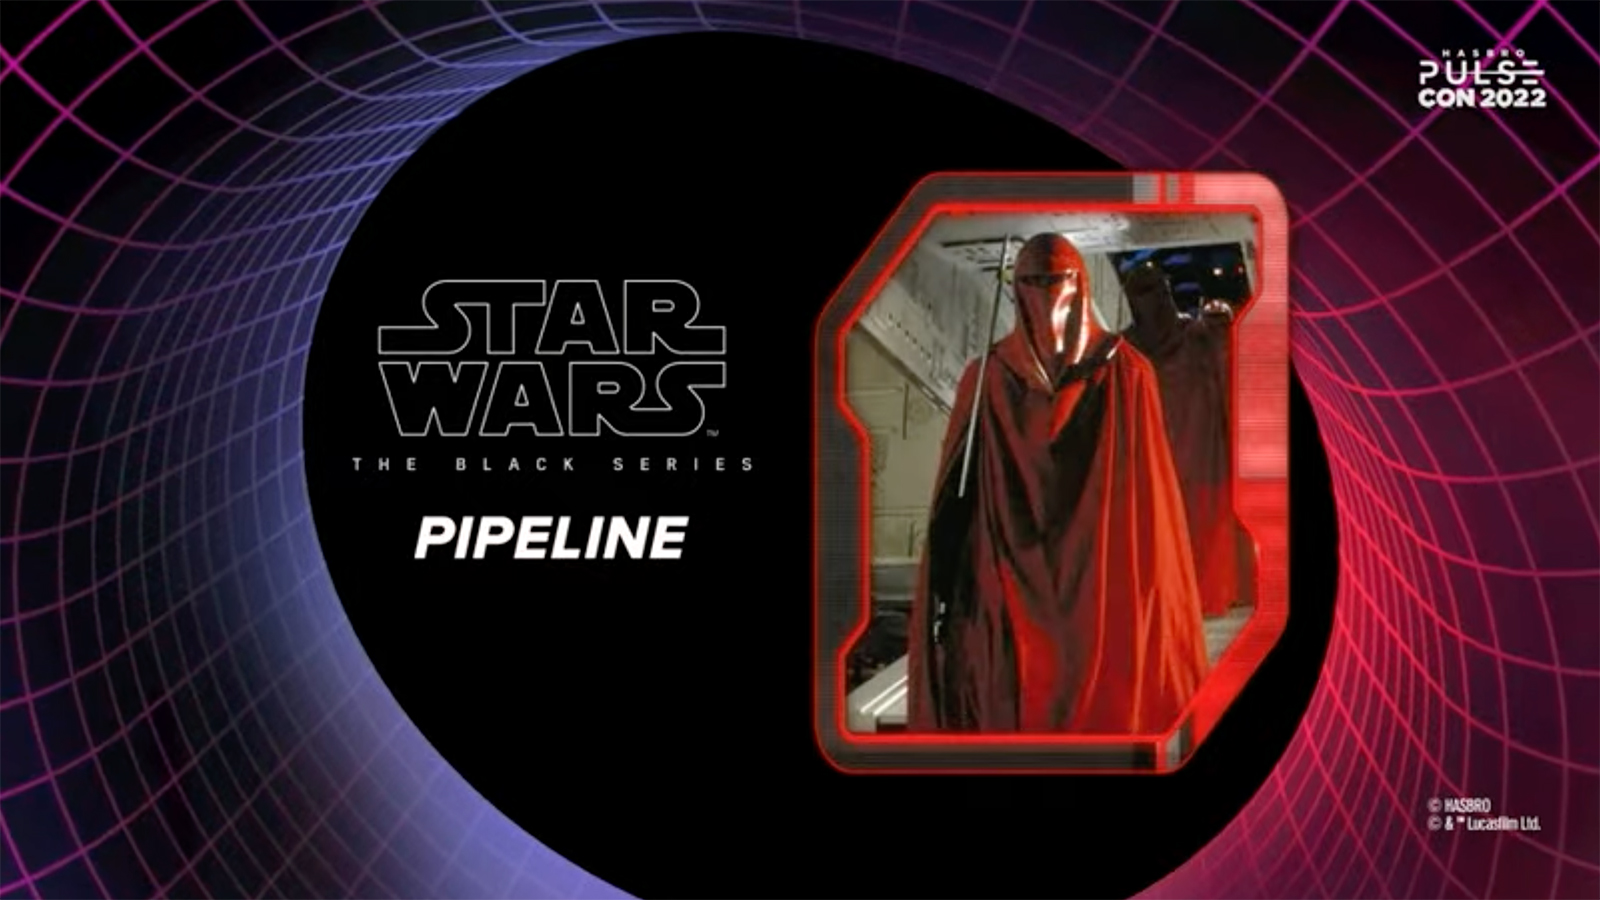 Hasbro Pulse Con 2022 -  The Vintage Collection and The Black Series Pipeline Reveals